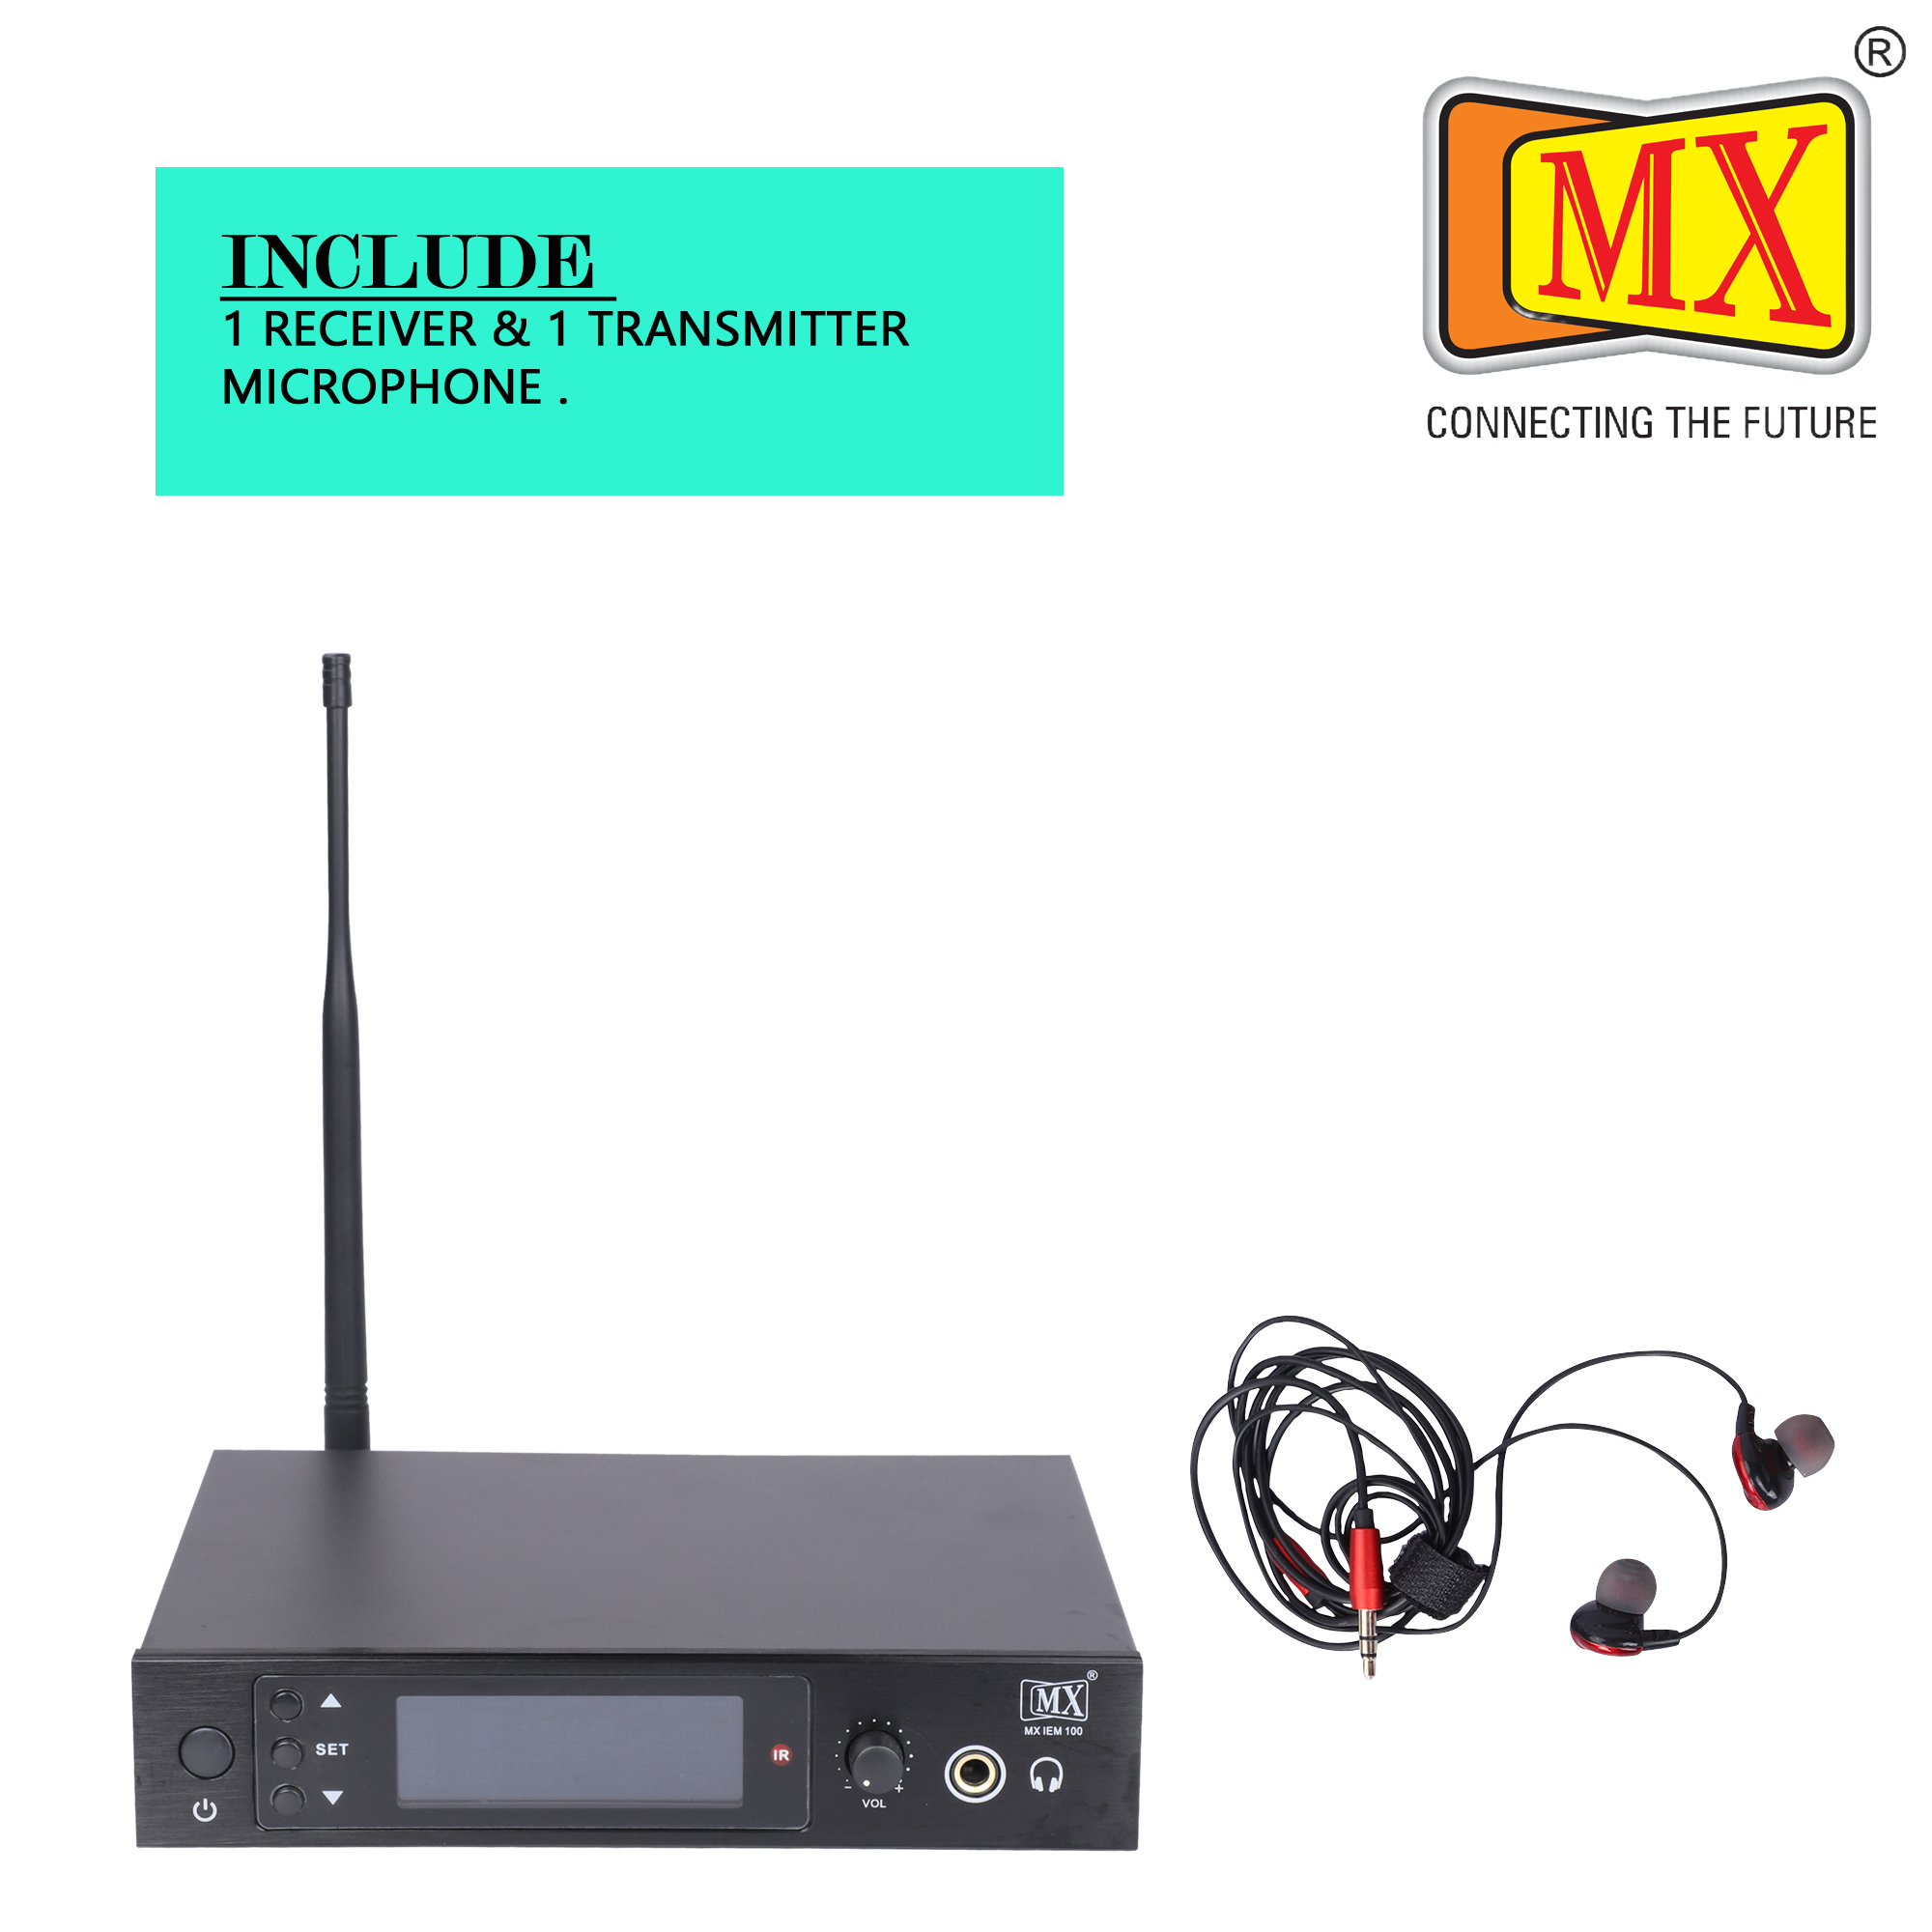 MX IEM Wireless In-ear monitor System Professional for Stereo System  Transmitter and Beltpack Receiver for Studio, Guitar, Band Rehearsal, Live  Performance – (MX IEM 100) - MX MDR TECHNOLOGIES LIMITED